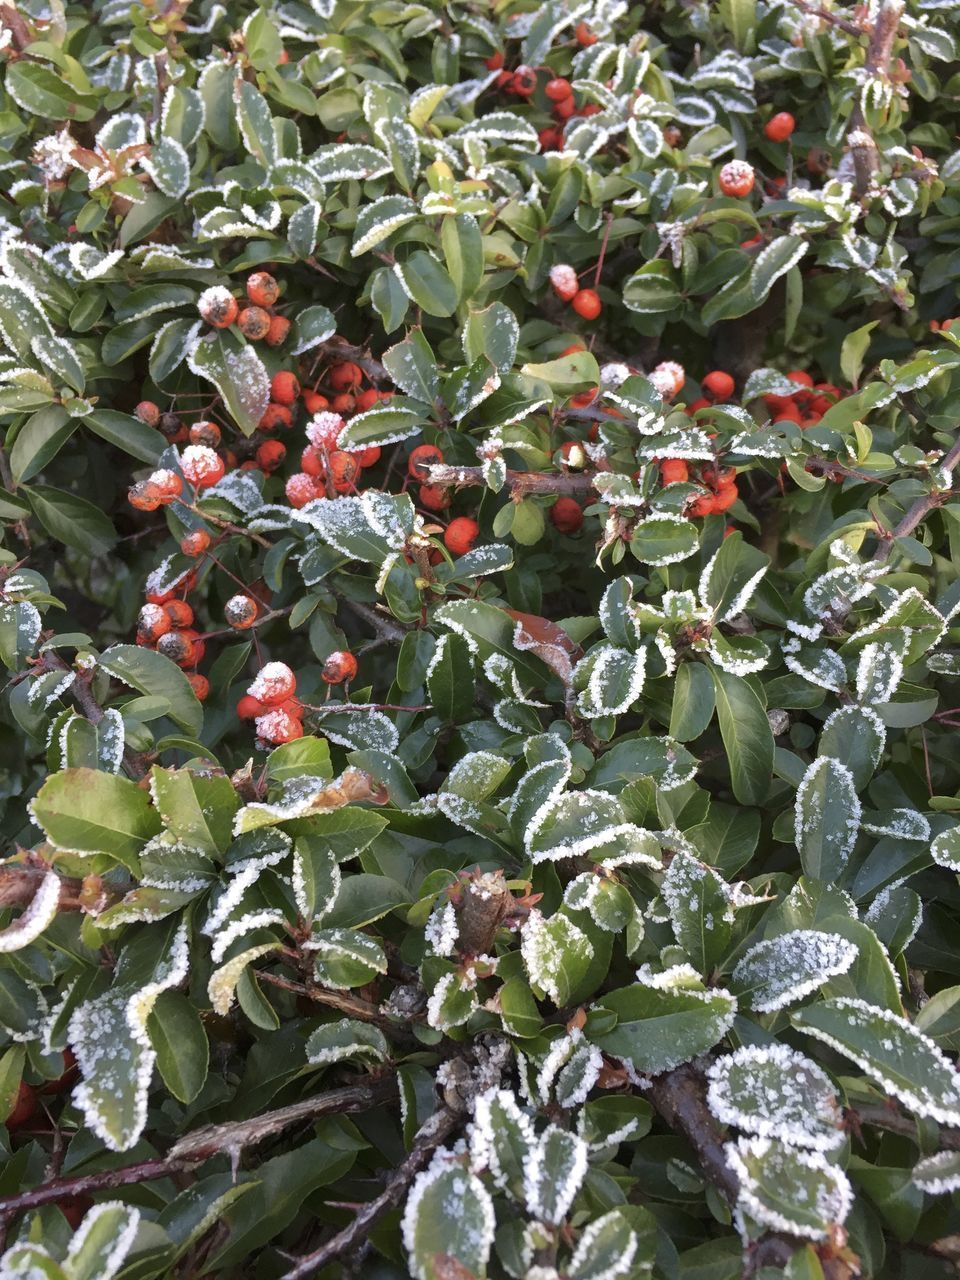 CLOSE-UP OF BERRIES ON PLANT